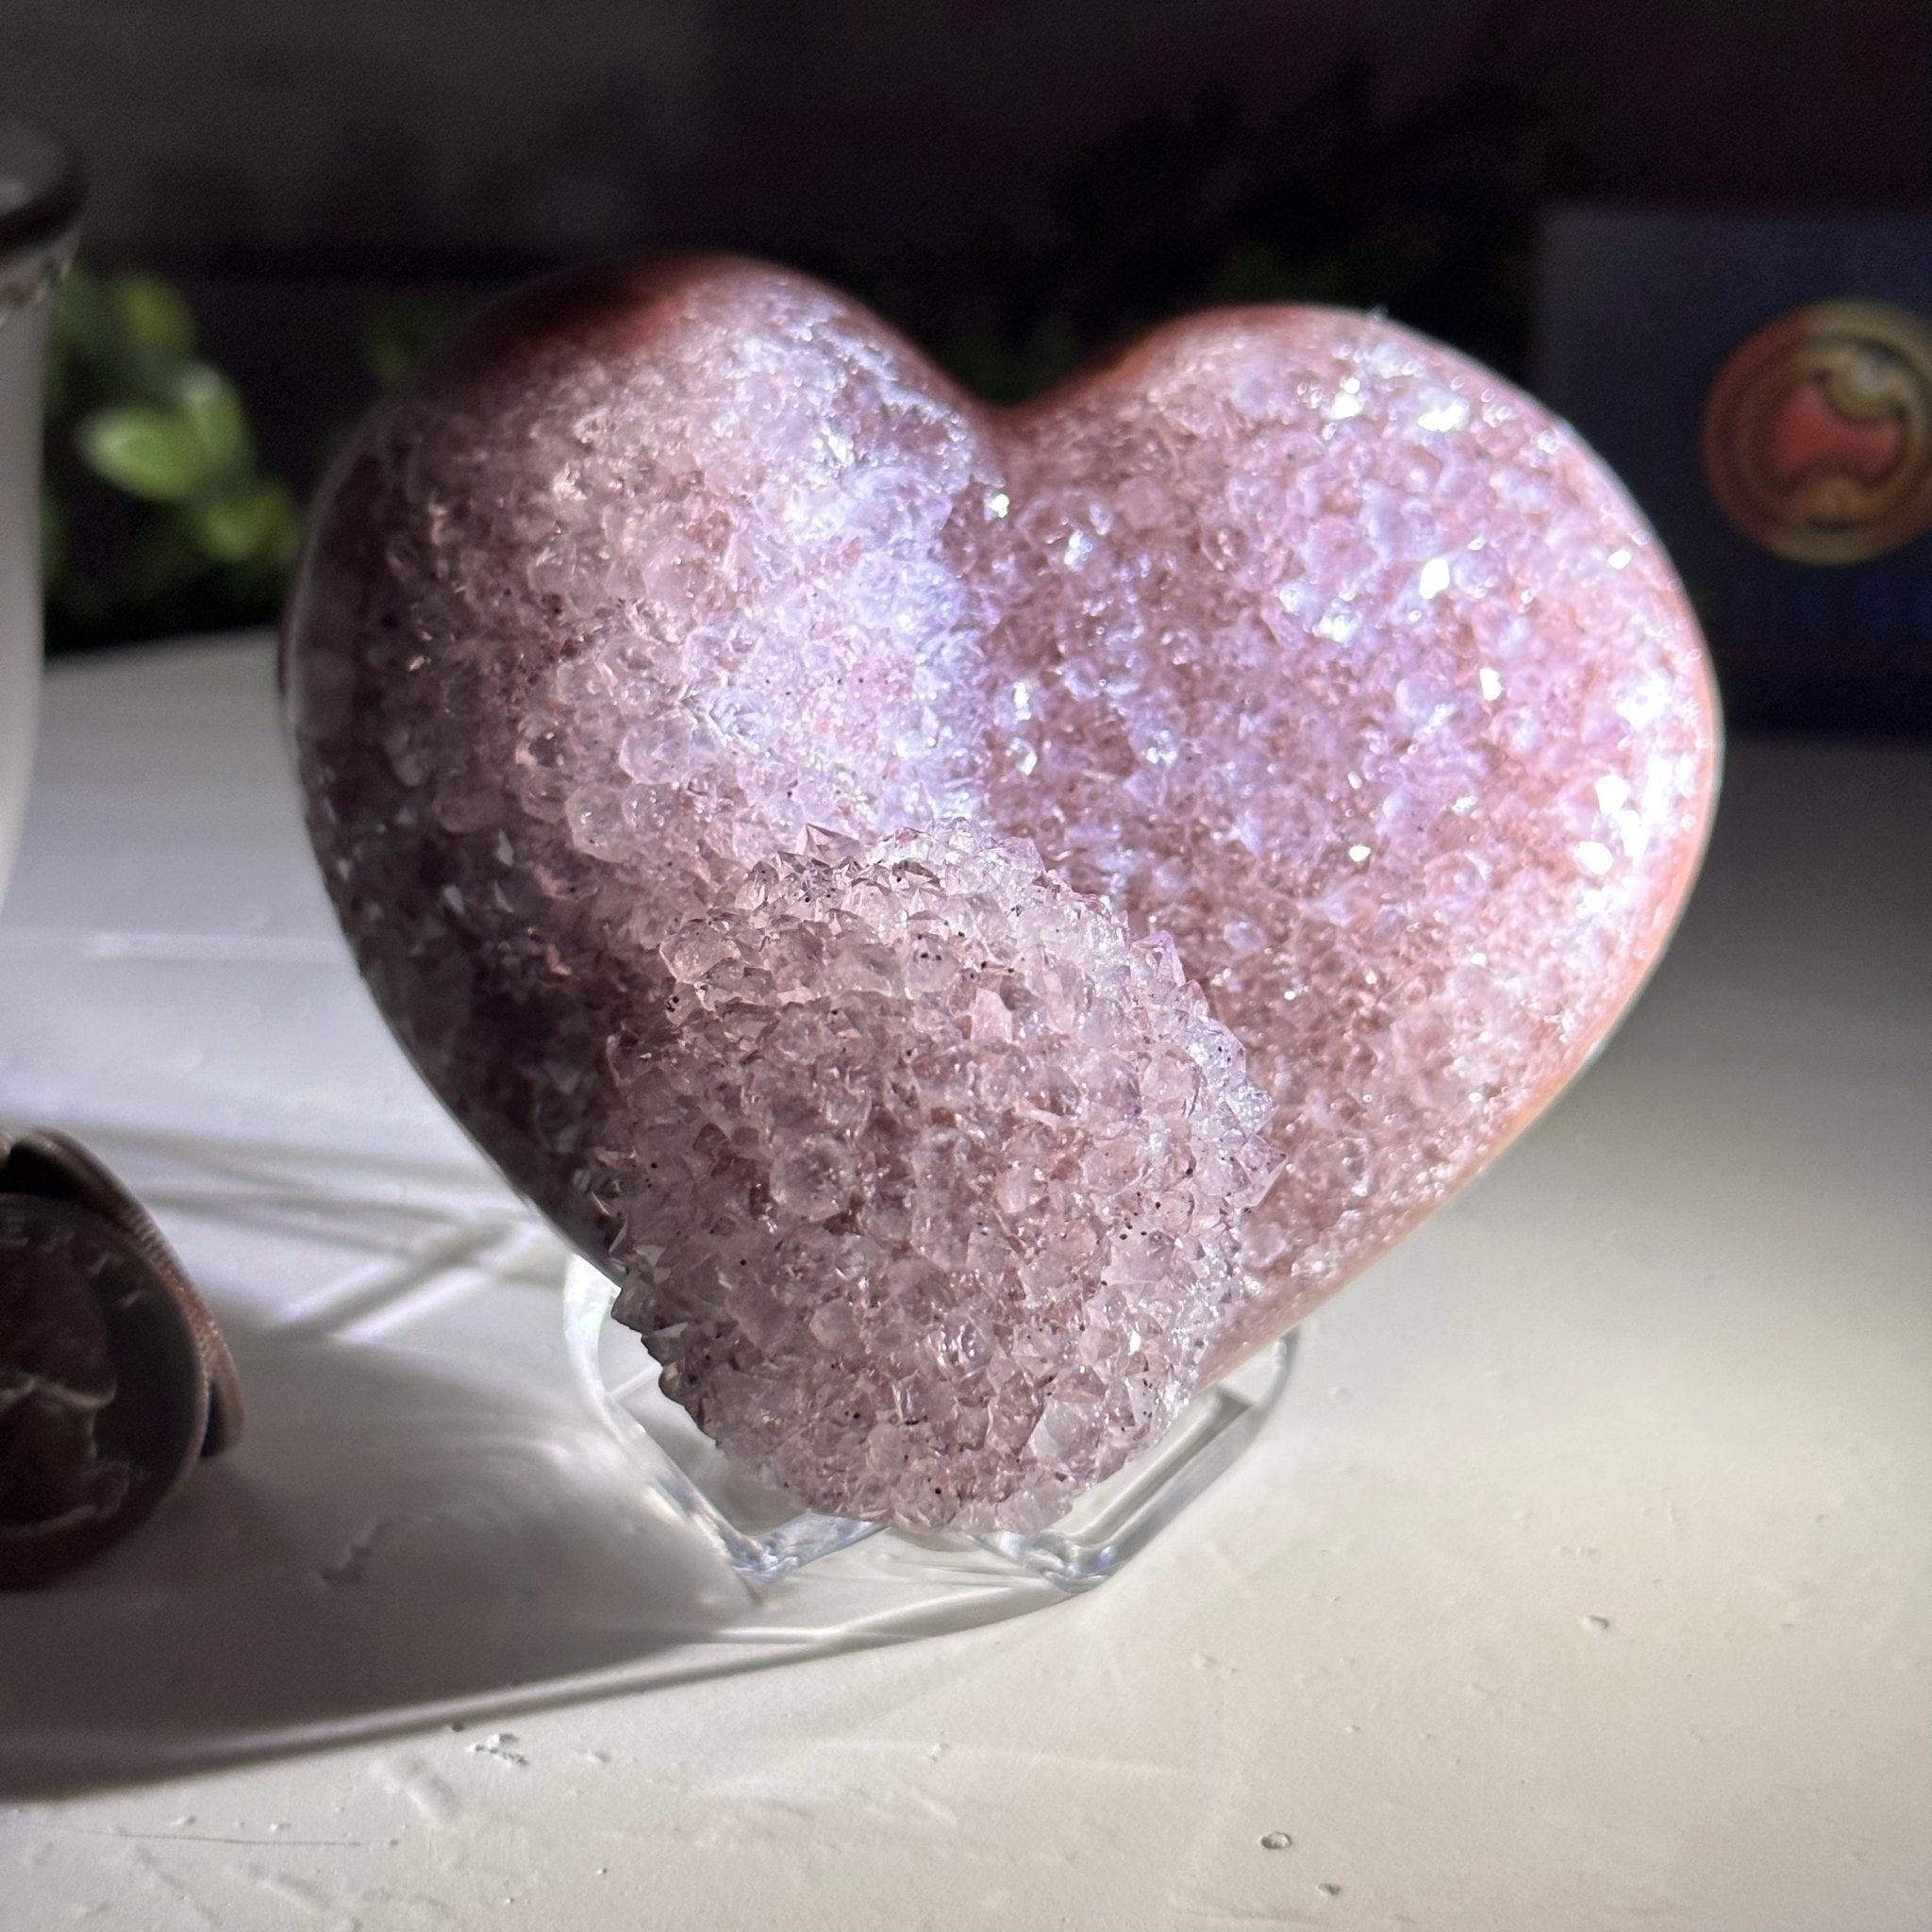 Extra Quality Amethyst Heart Geode on an Acrylic Stand, 1 lbs & 2.8" Tall #5462-0054 by Brazil Gems - Brazil GemsBrazil GemsExtra Quality Amethyst Heart Geode on an Acrylic Stand, 1 lbs & 2.8" Tall #5462-0054 by Brazil GemsHearts5462-0054